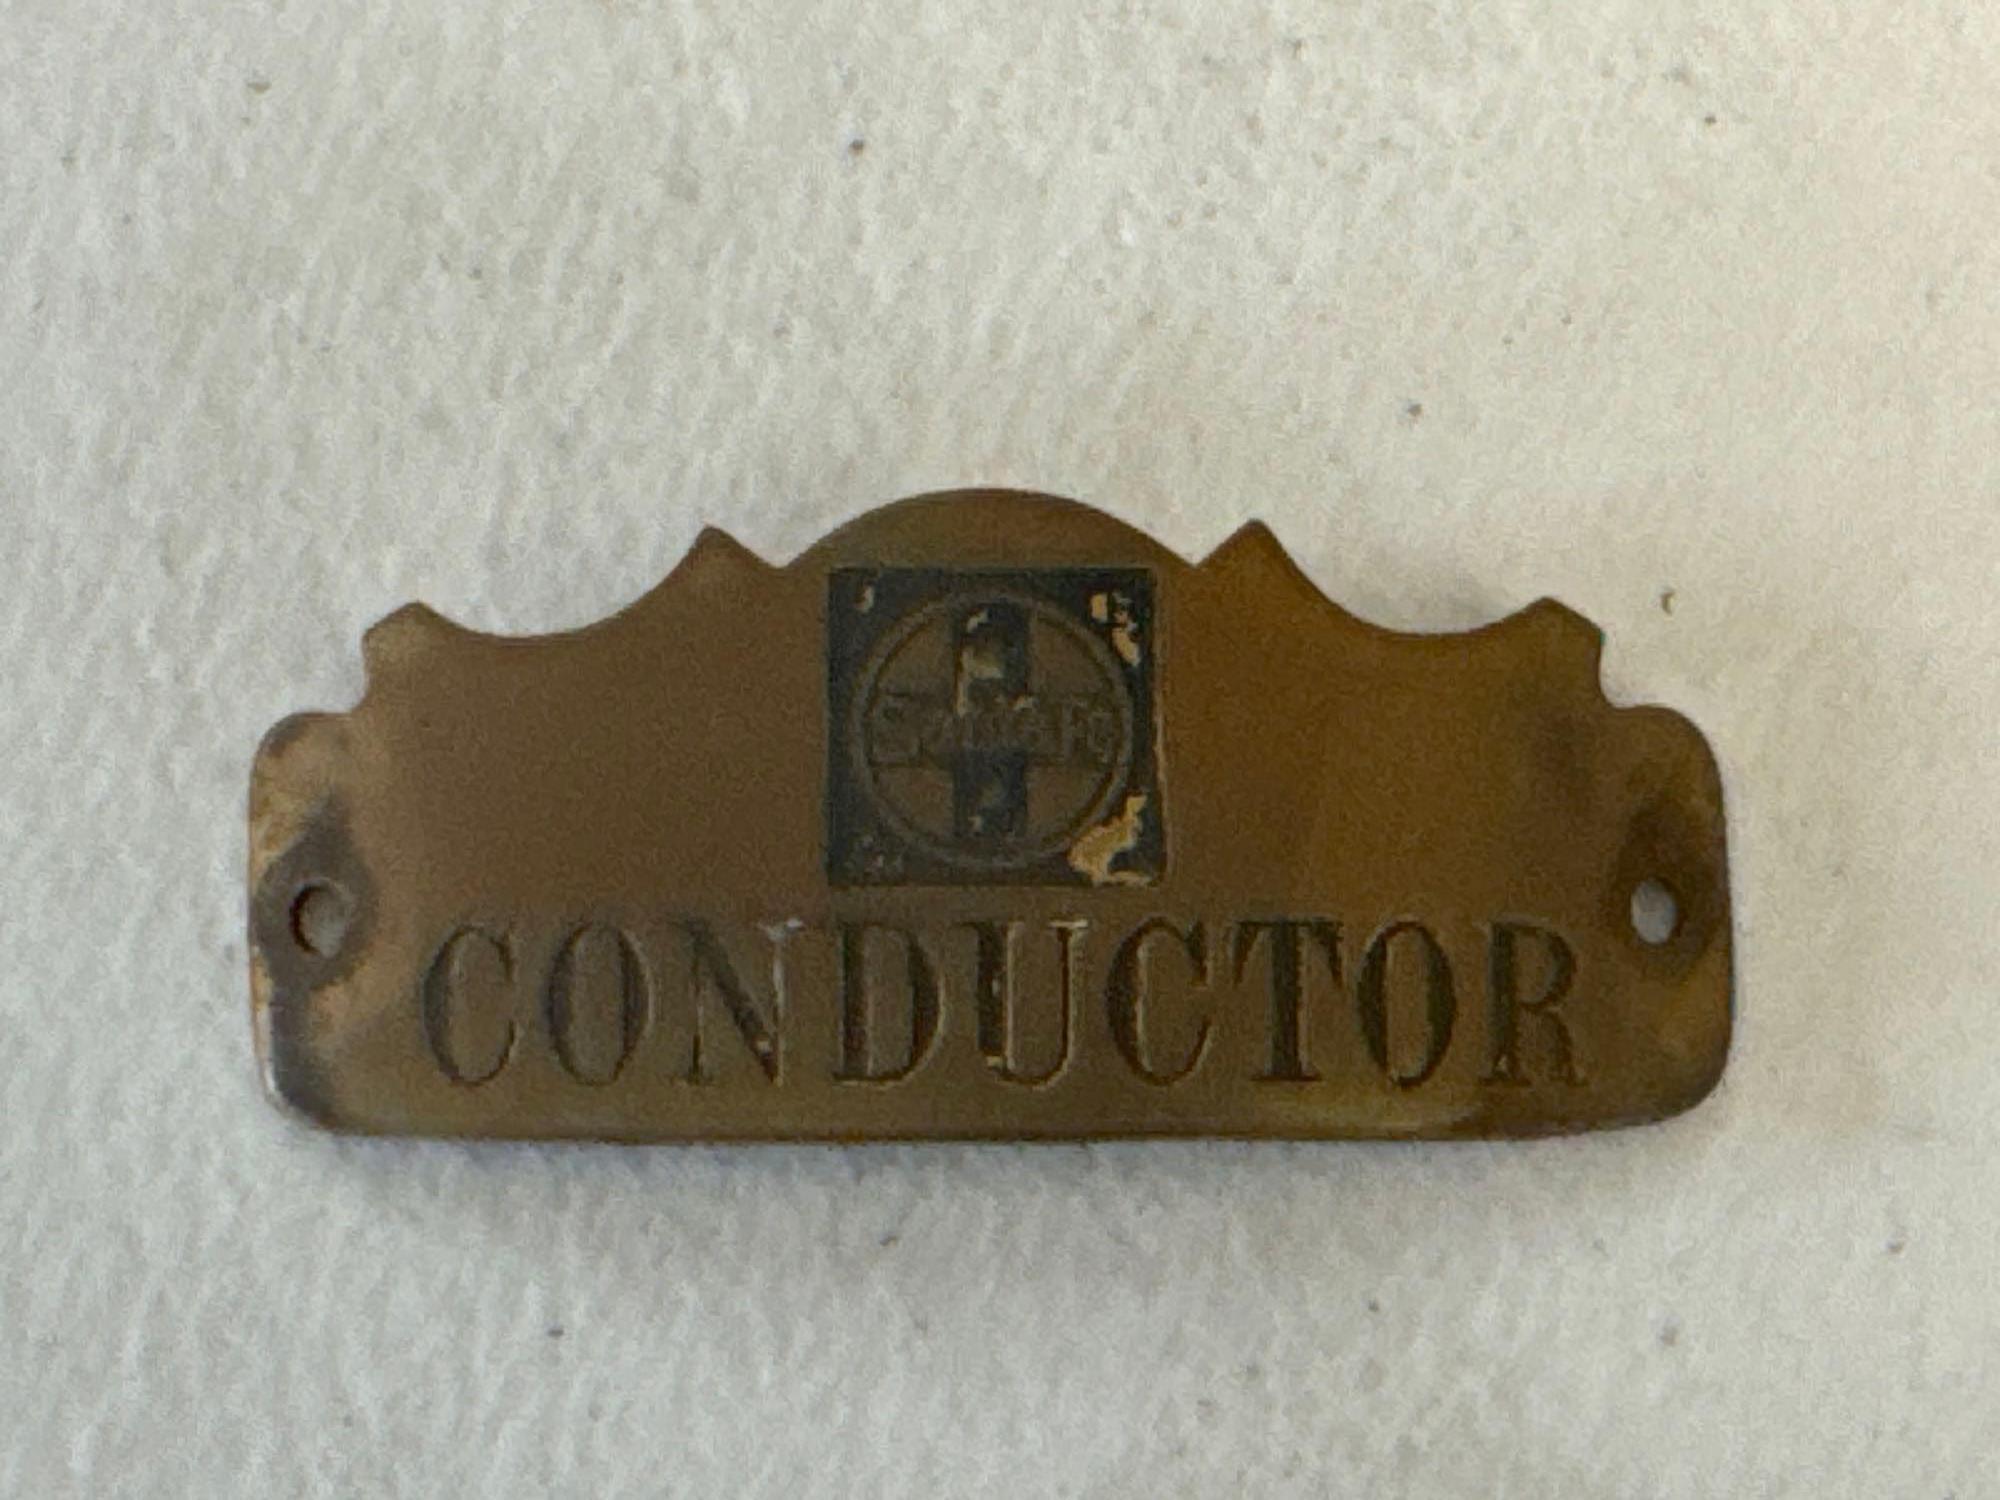 Vintage HO Scale Freight Train Caboose & Metal Train Conductor Badges